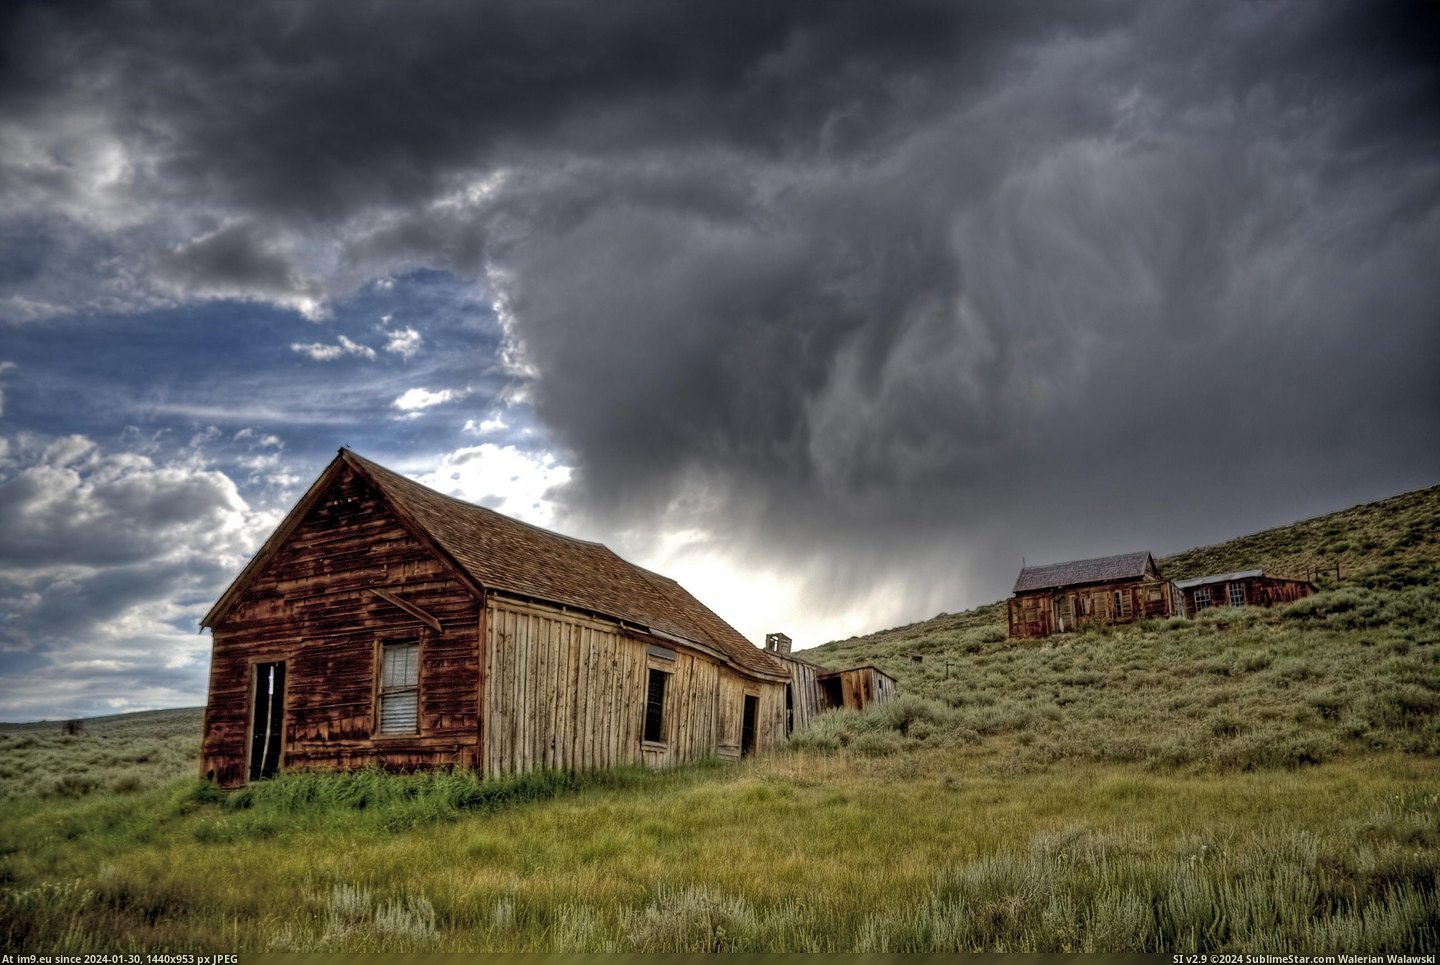 Bodie Ghost Town Storm (in Bodie - a ghost town in Eastern California)